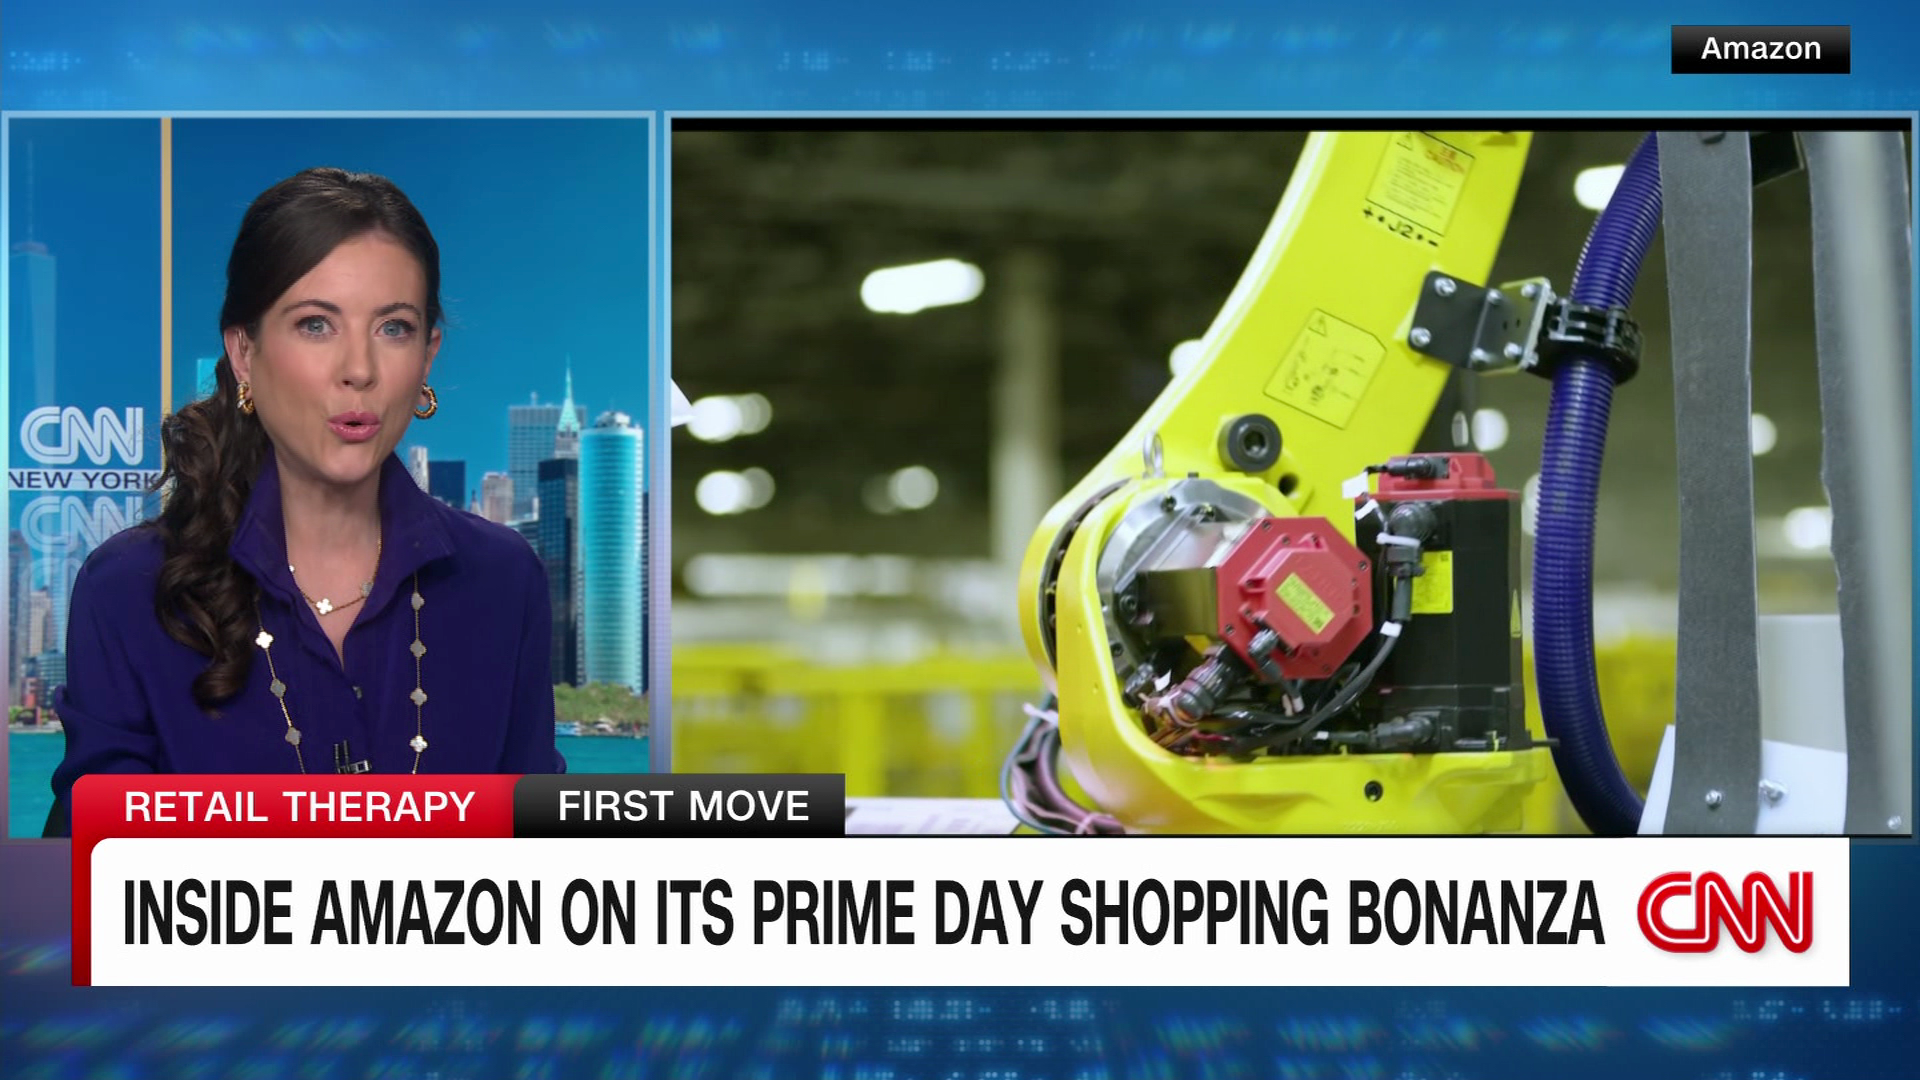 s Prime Day Sets Record With 375 Million Items Sold